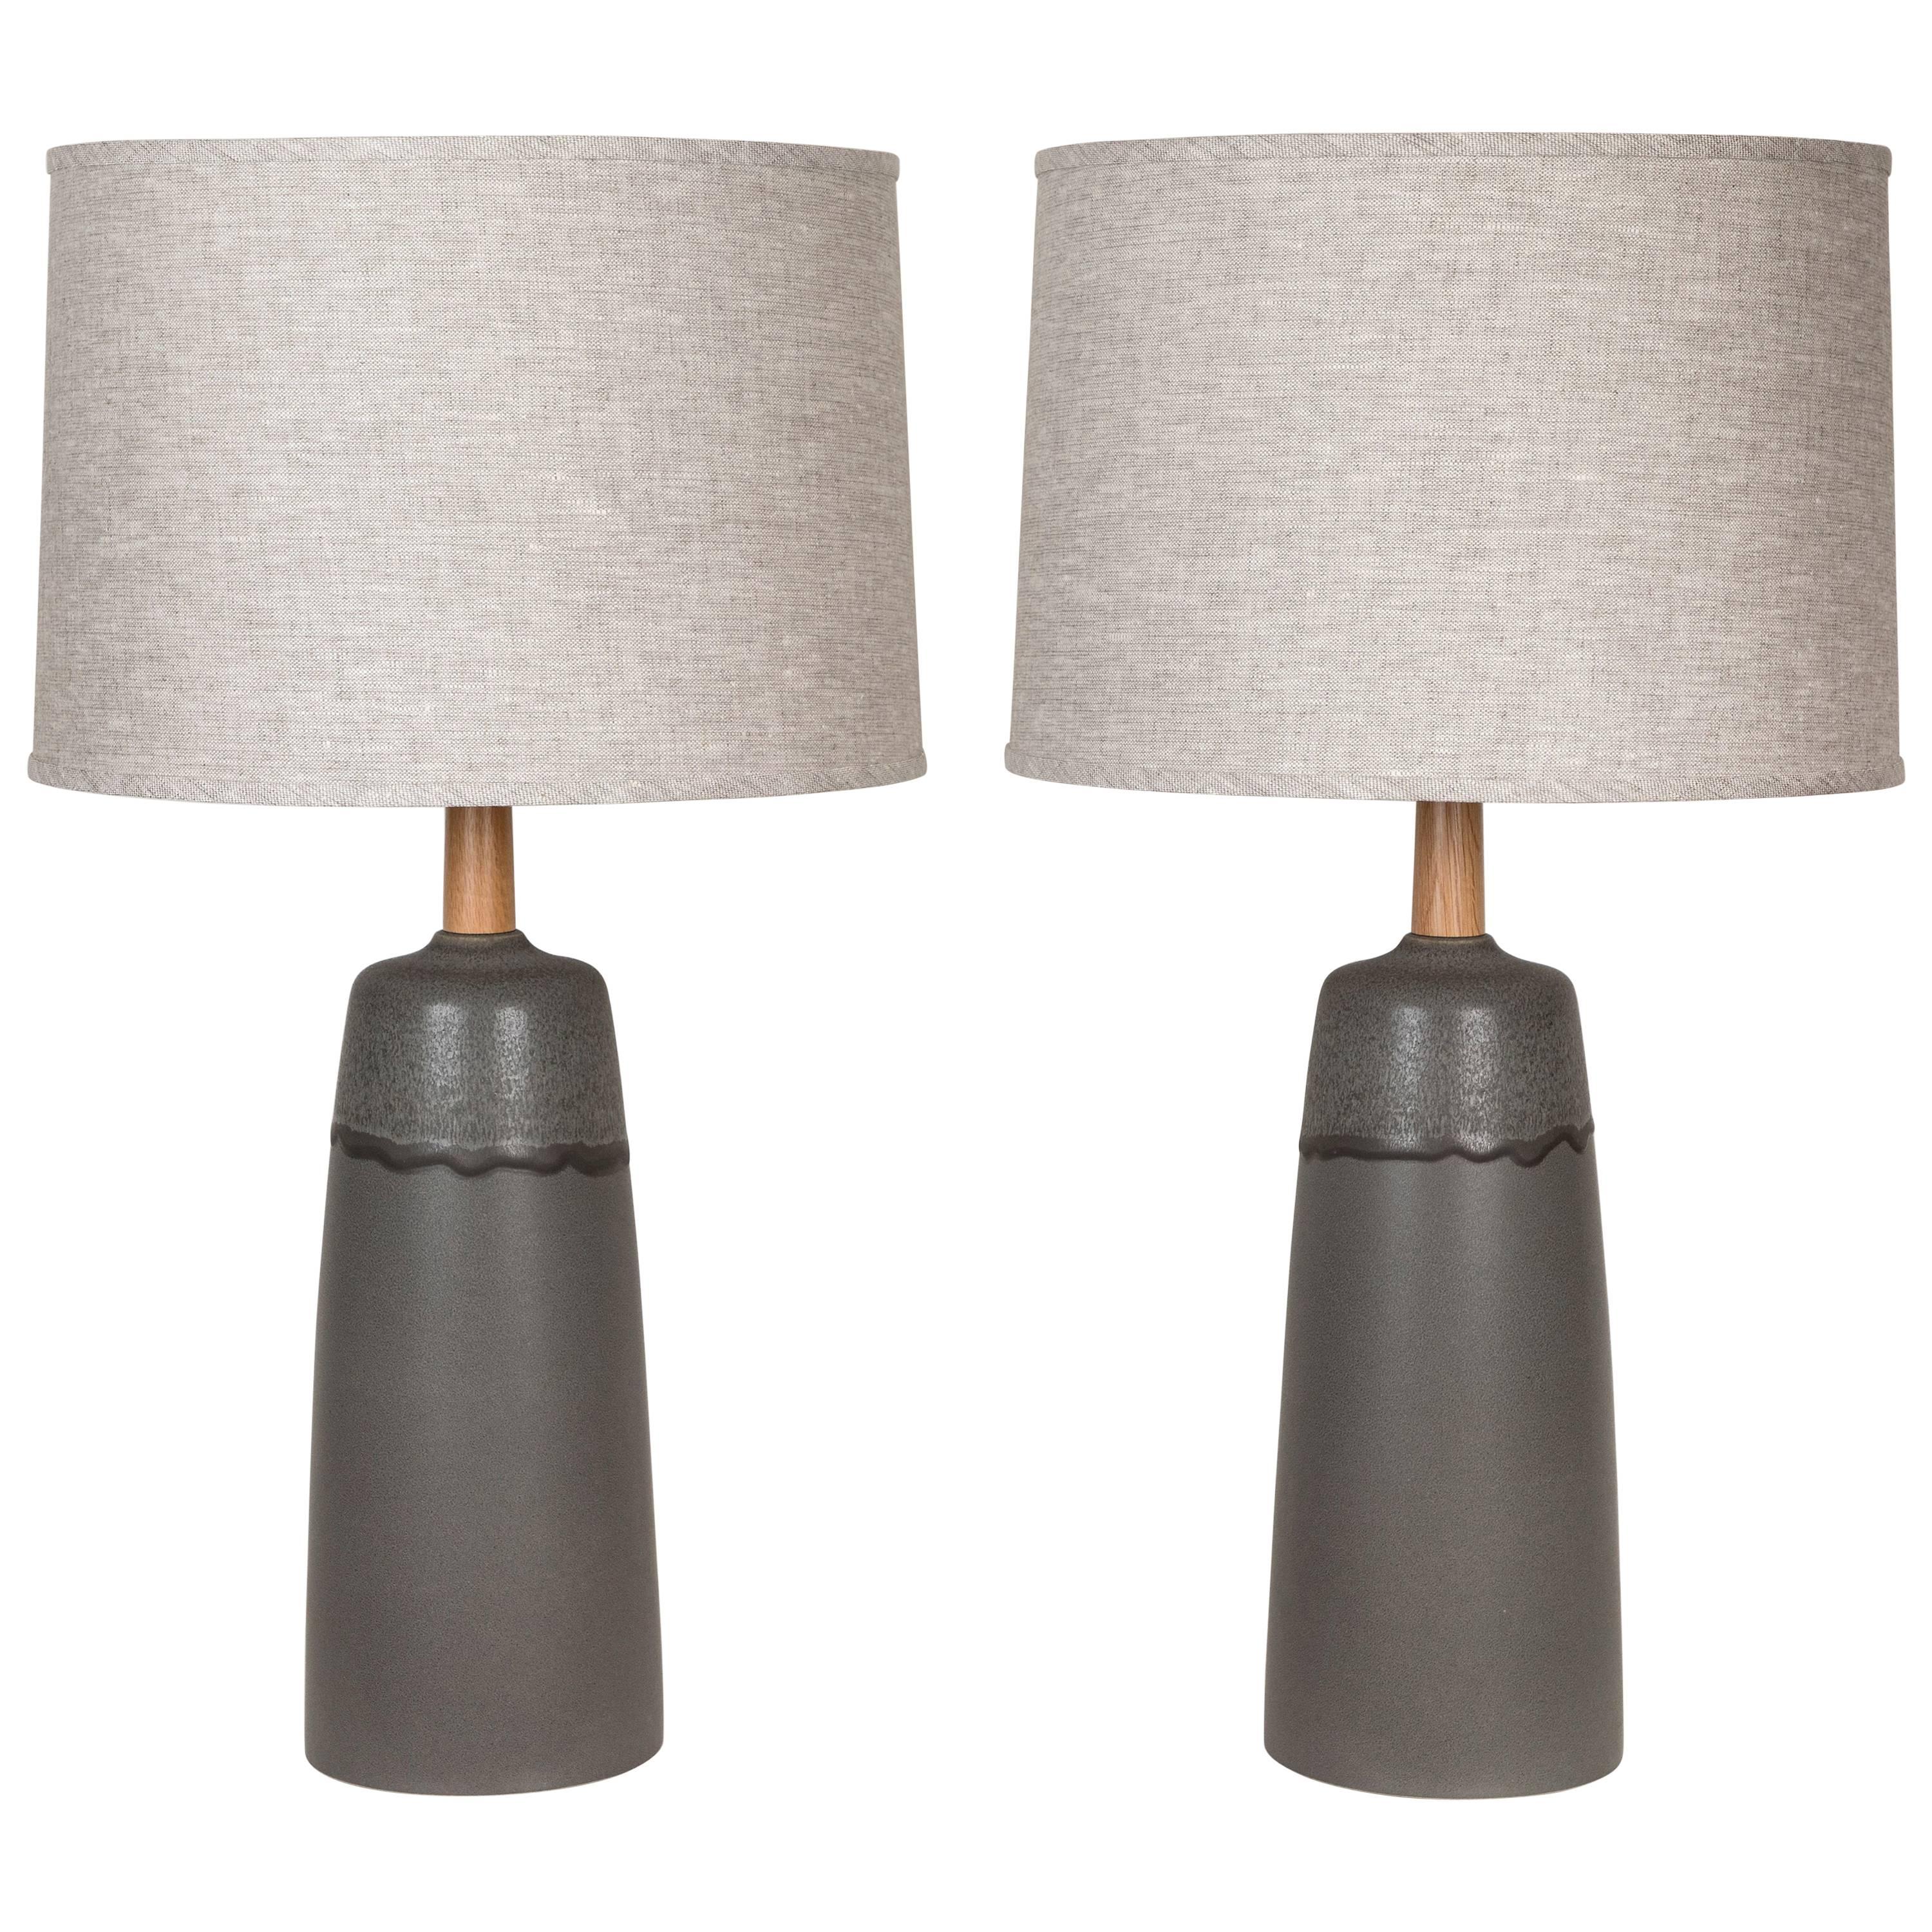 Pair of Tor Lamps by Stone and Sawyer for Lawson-Fenning